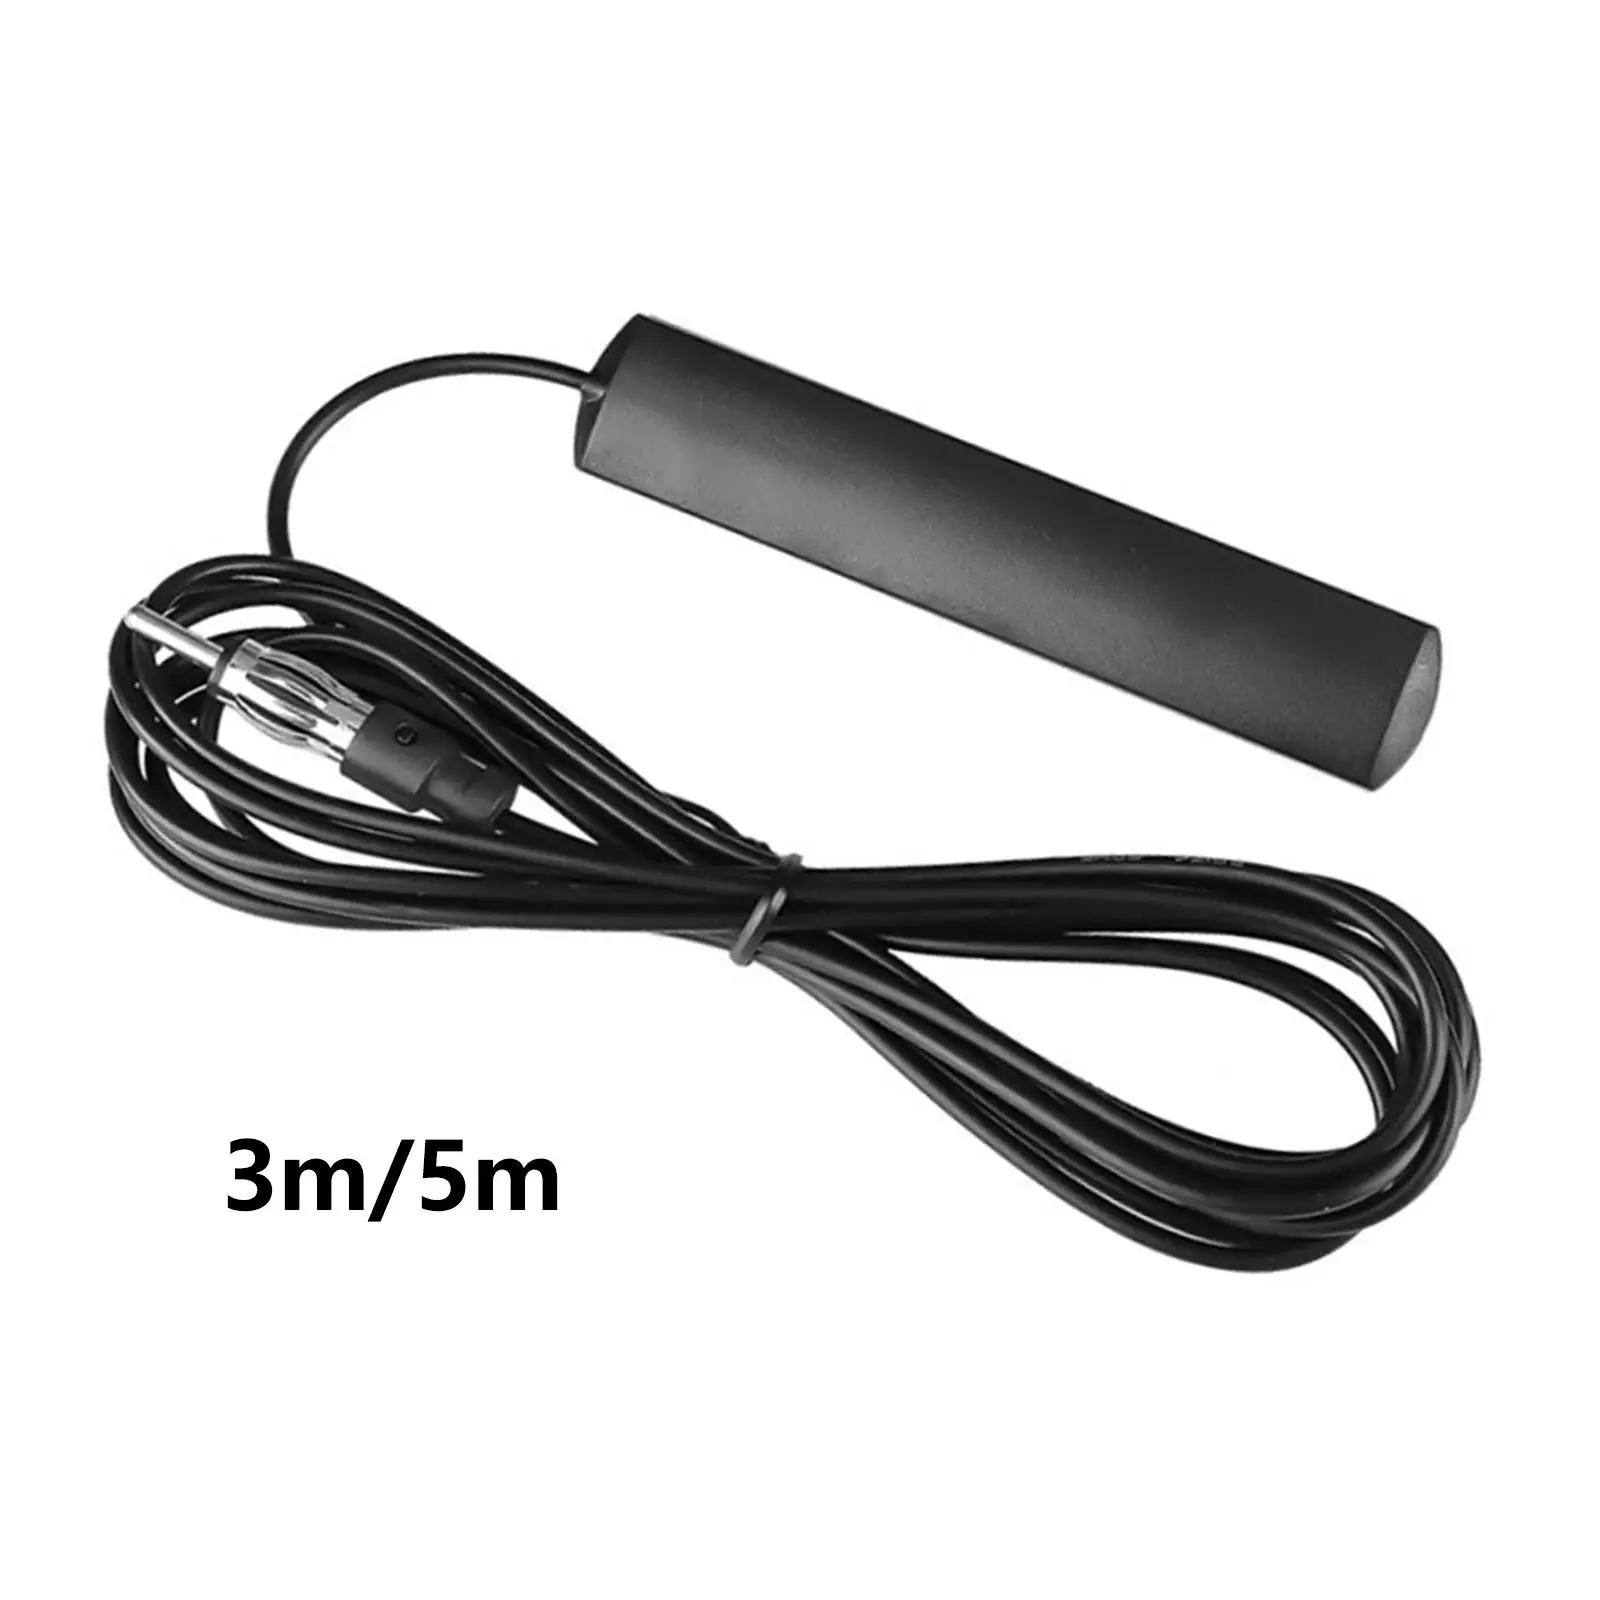 Car Antenna AM FM Radio Antenna Signal Amp Amplifier for Vehicle Motorcycle Campers